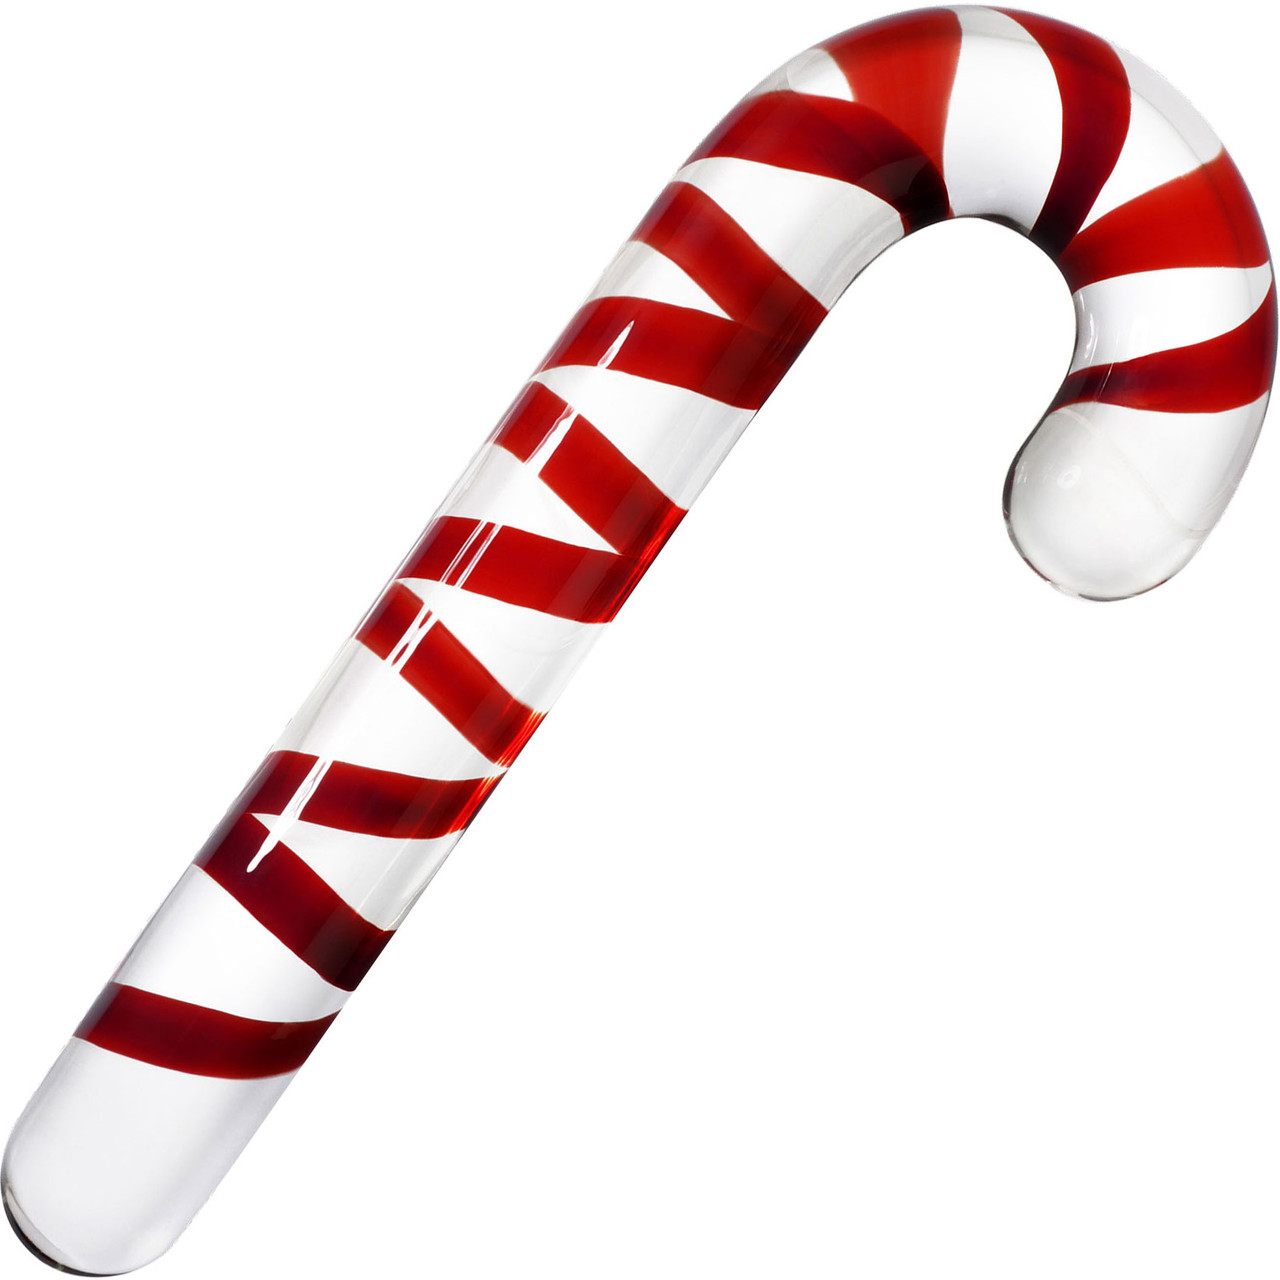 Best of Candy cane glass dildo